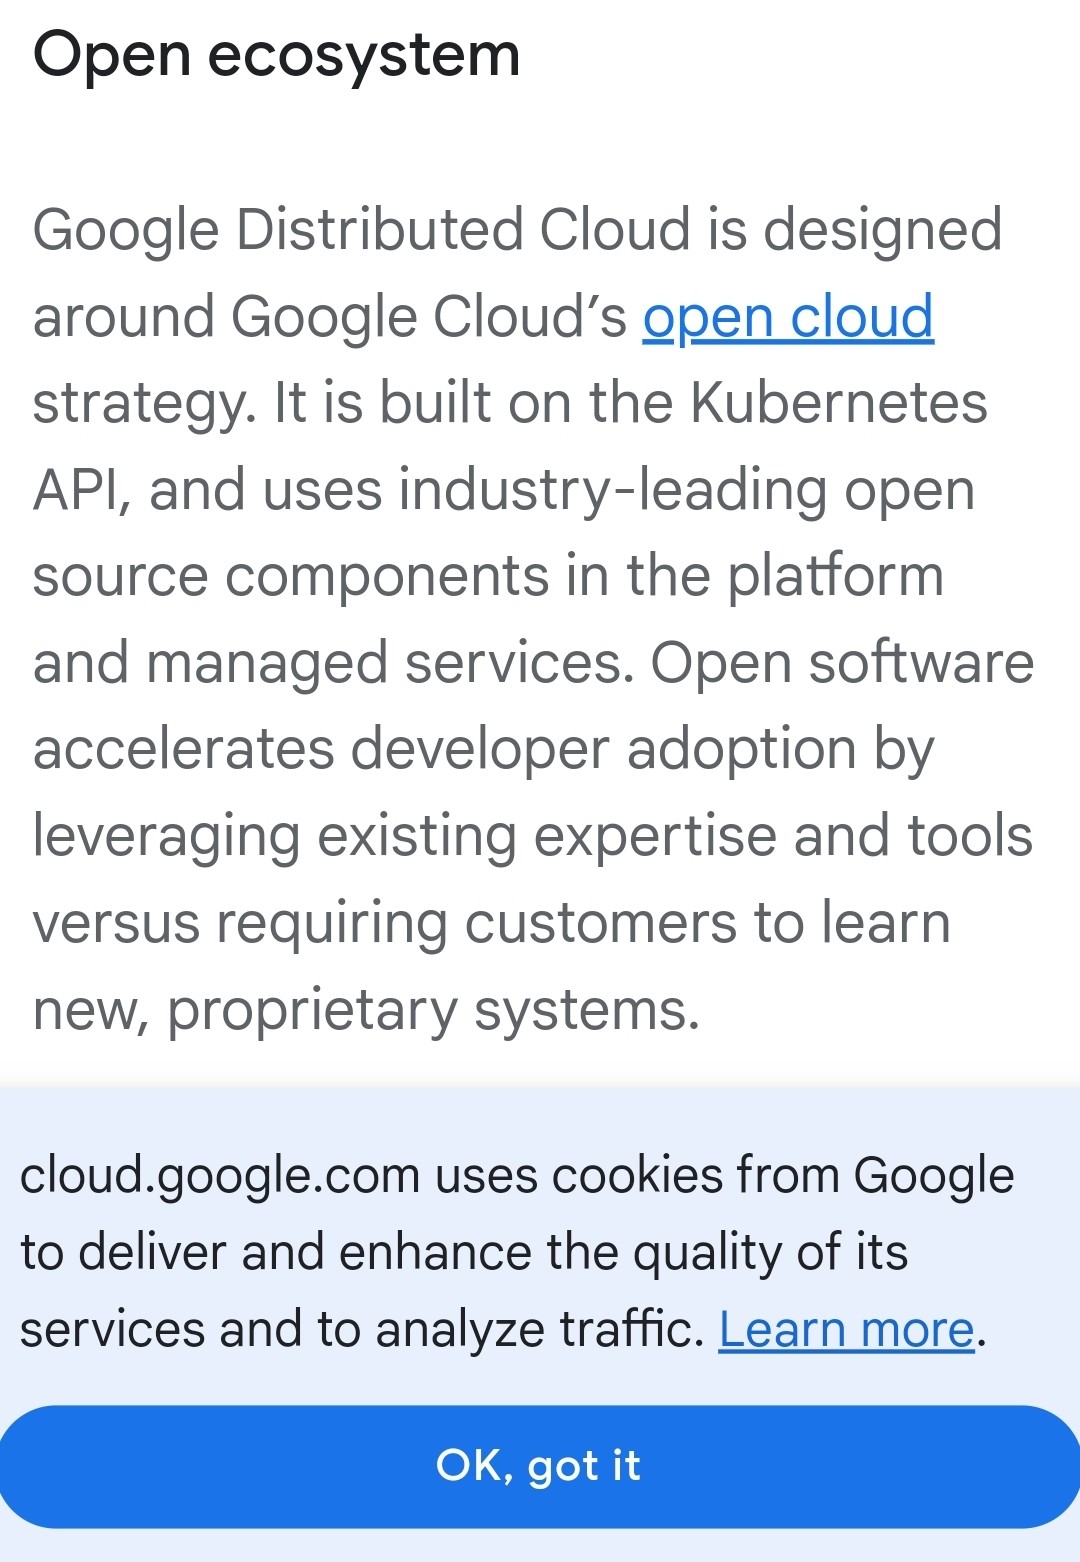 "Open source components" and "Open software". Are the terms interchangeable in their usage? We might never know.